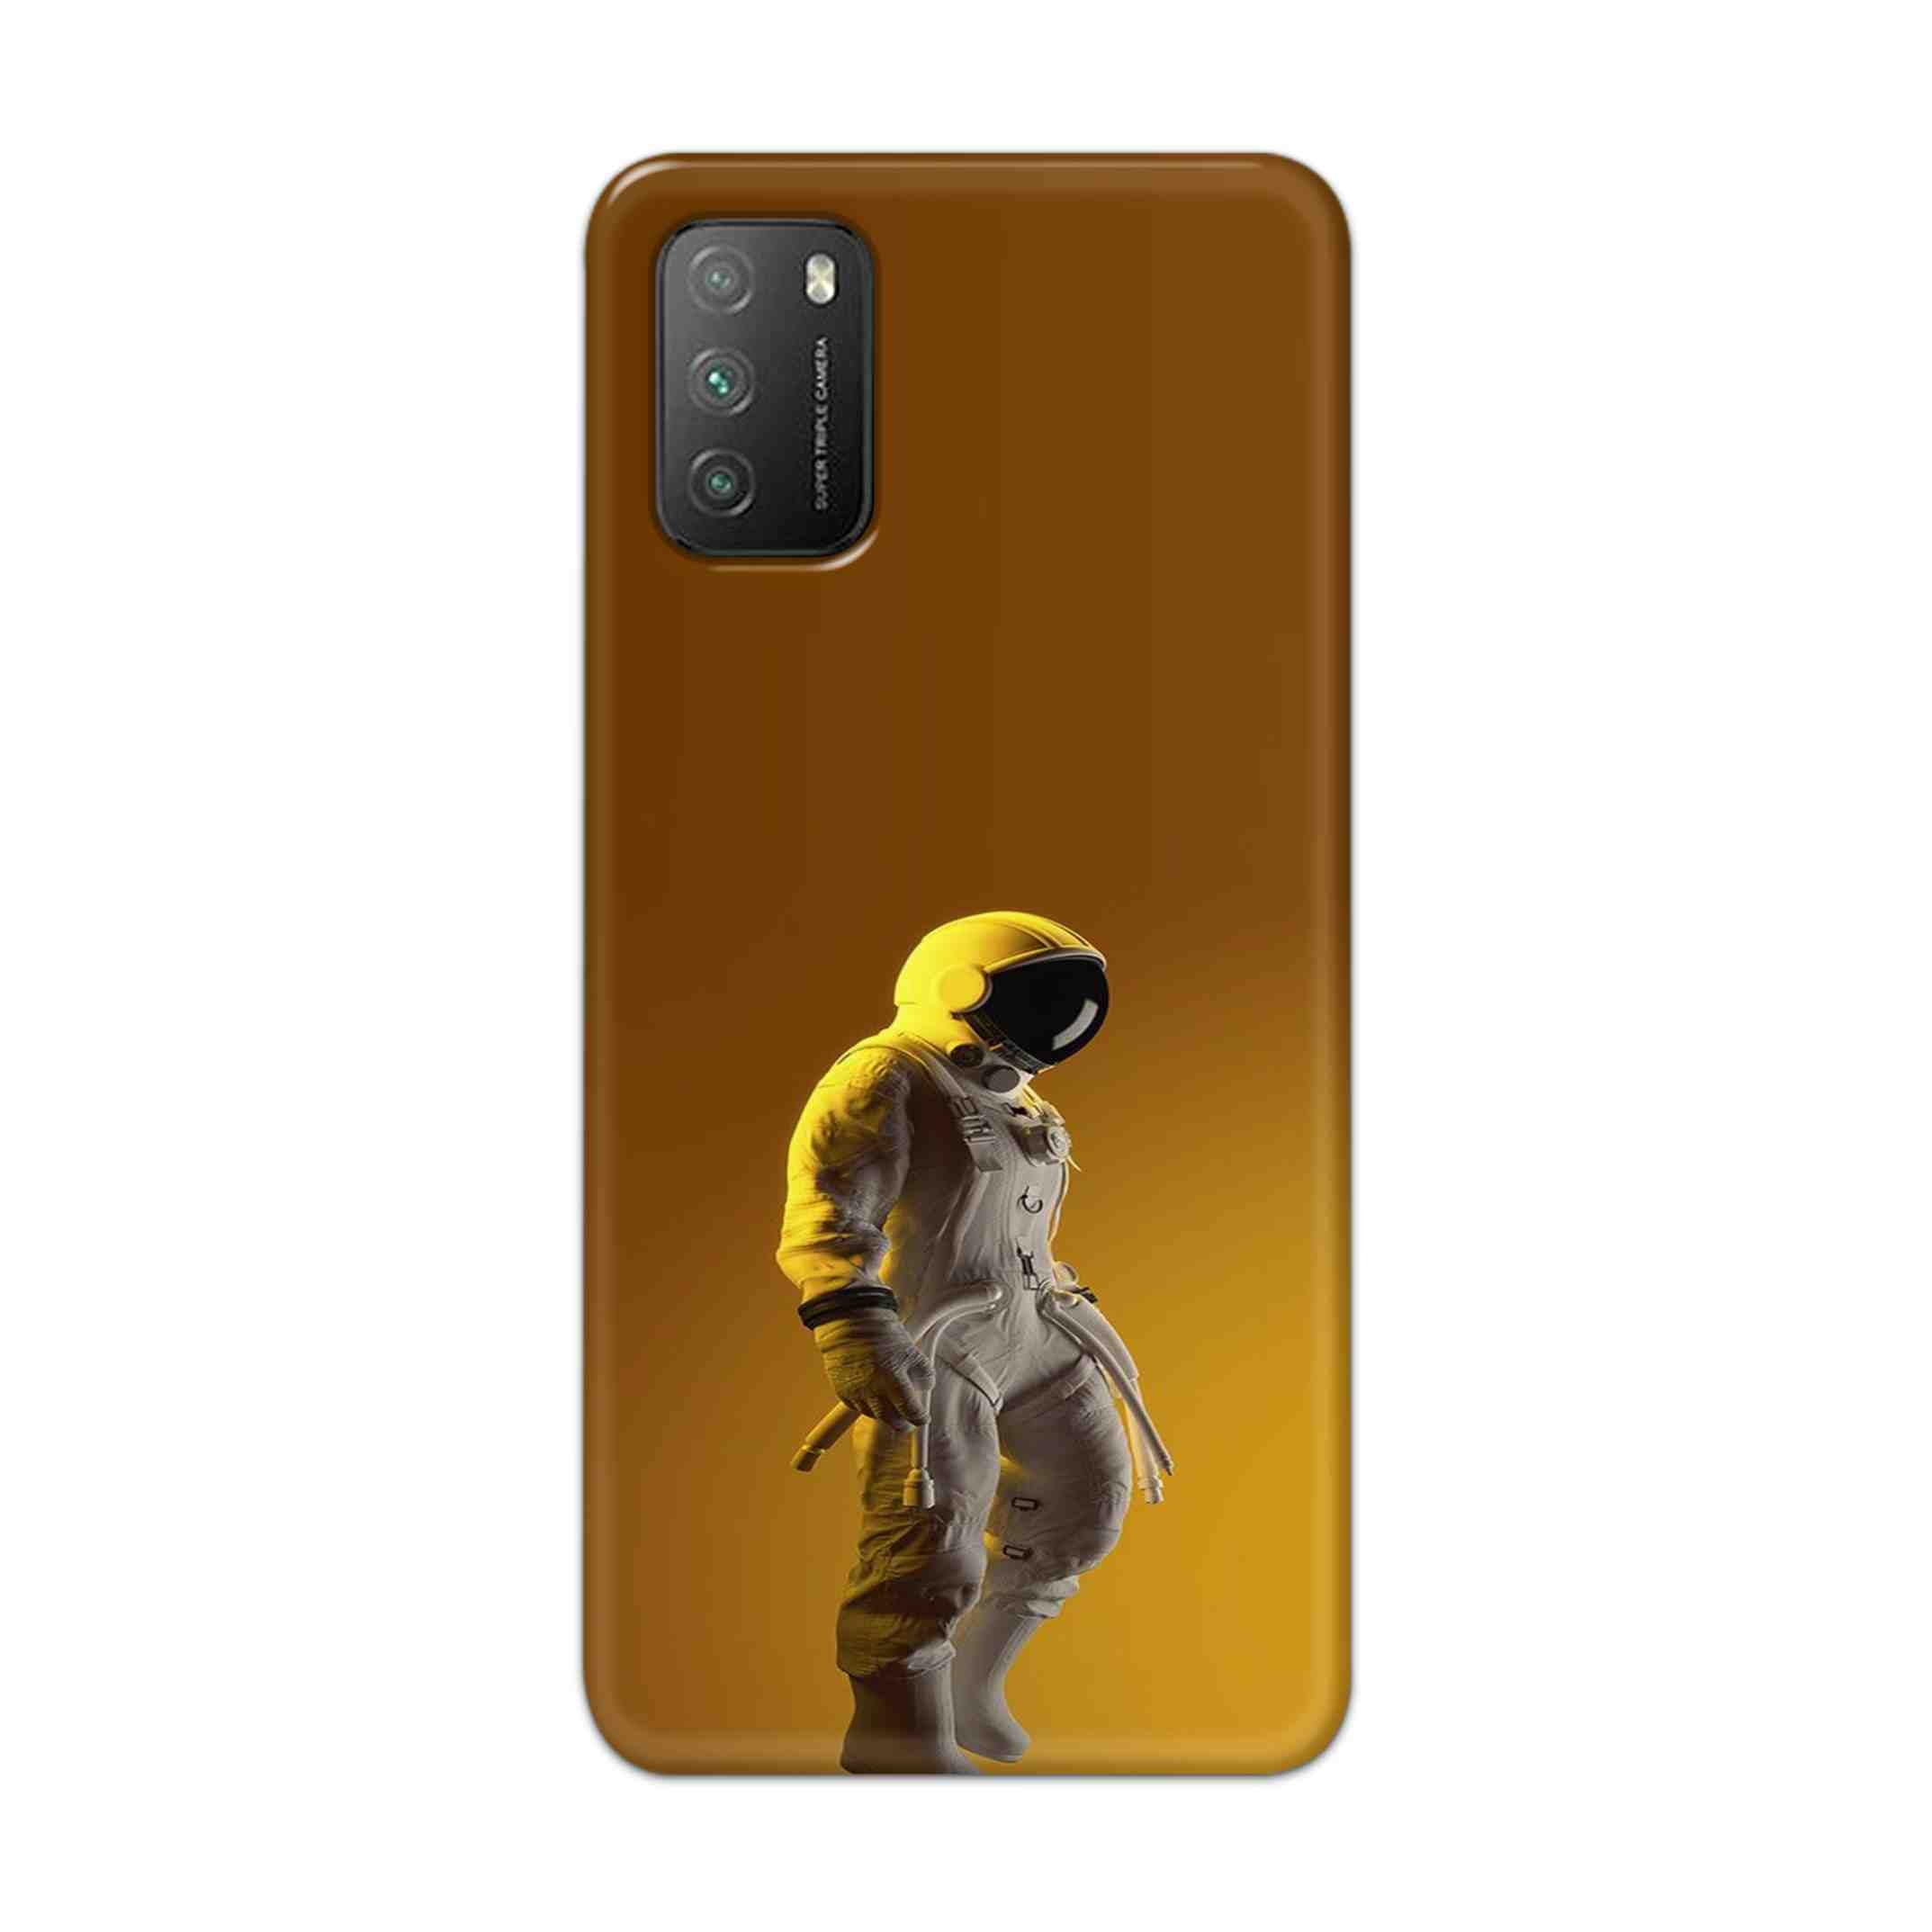 Buy Yellow Astronaut Hard Back Mobile Phone Case Cover For Poco M3 Online